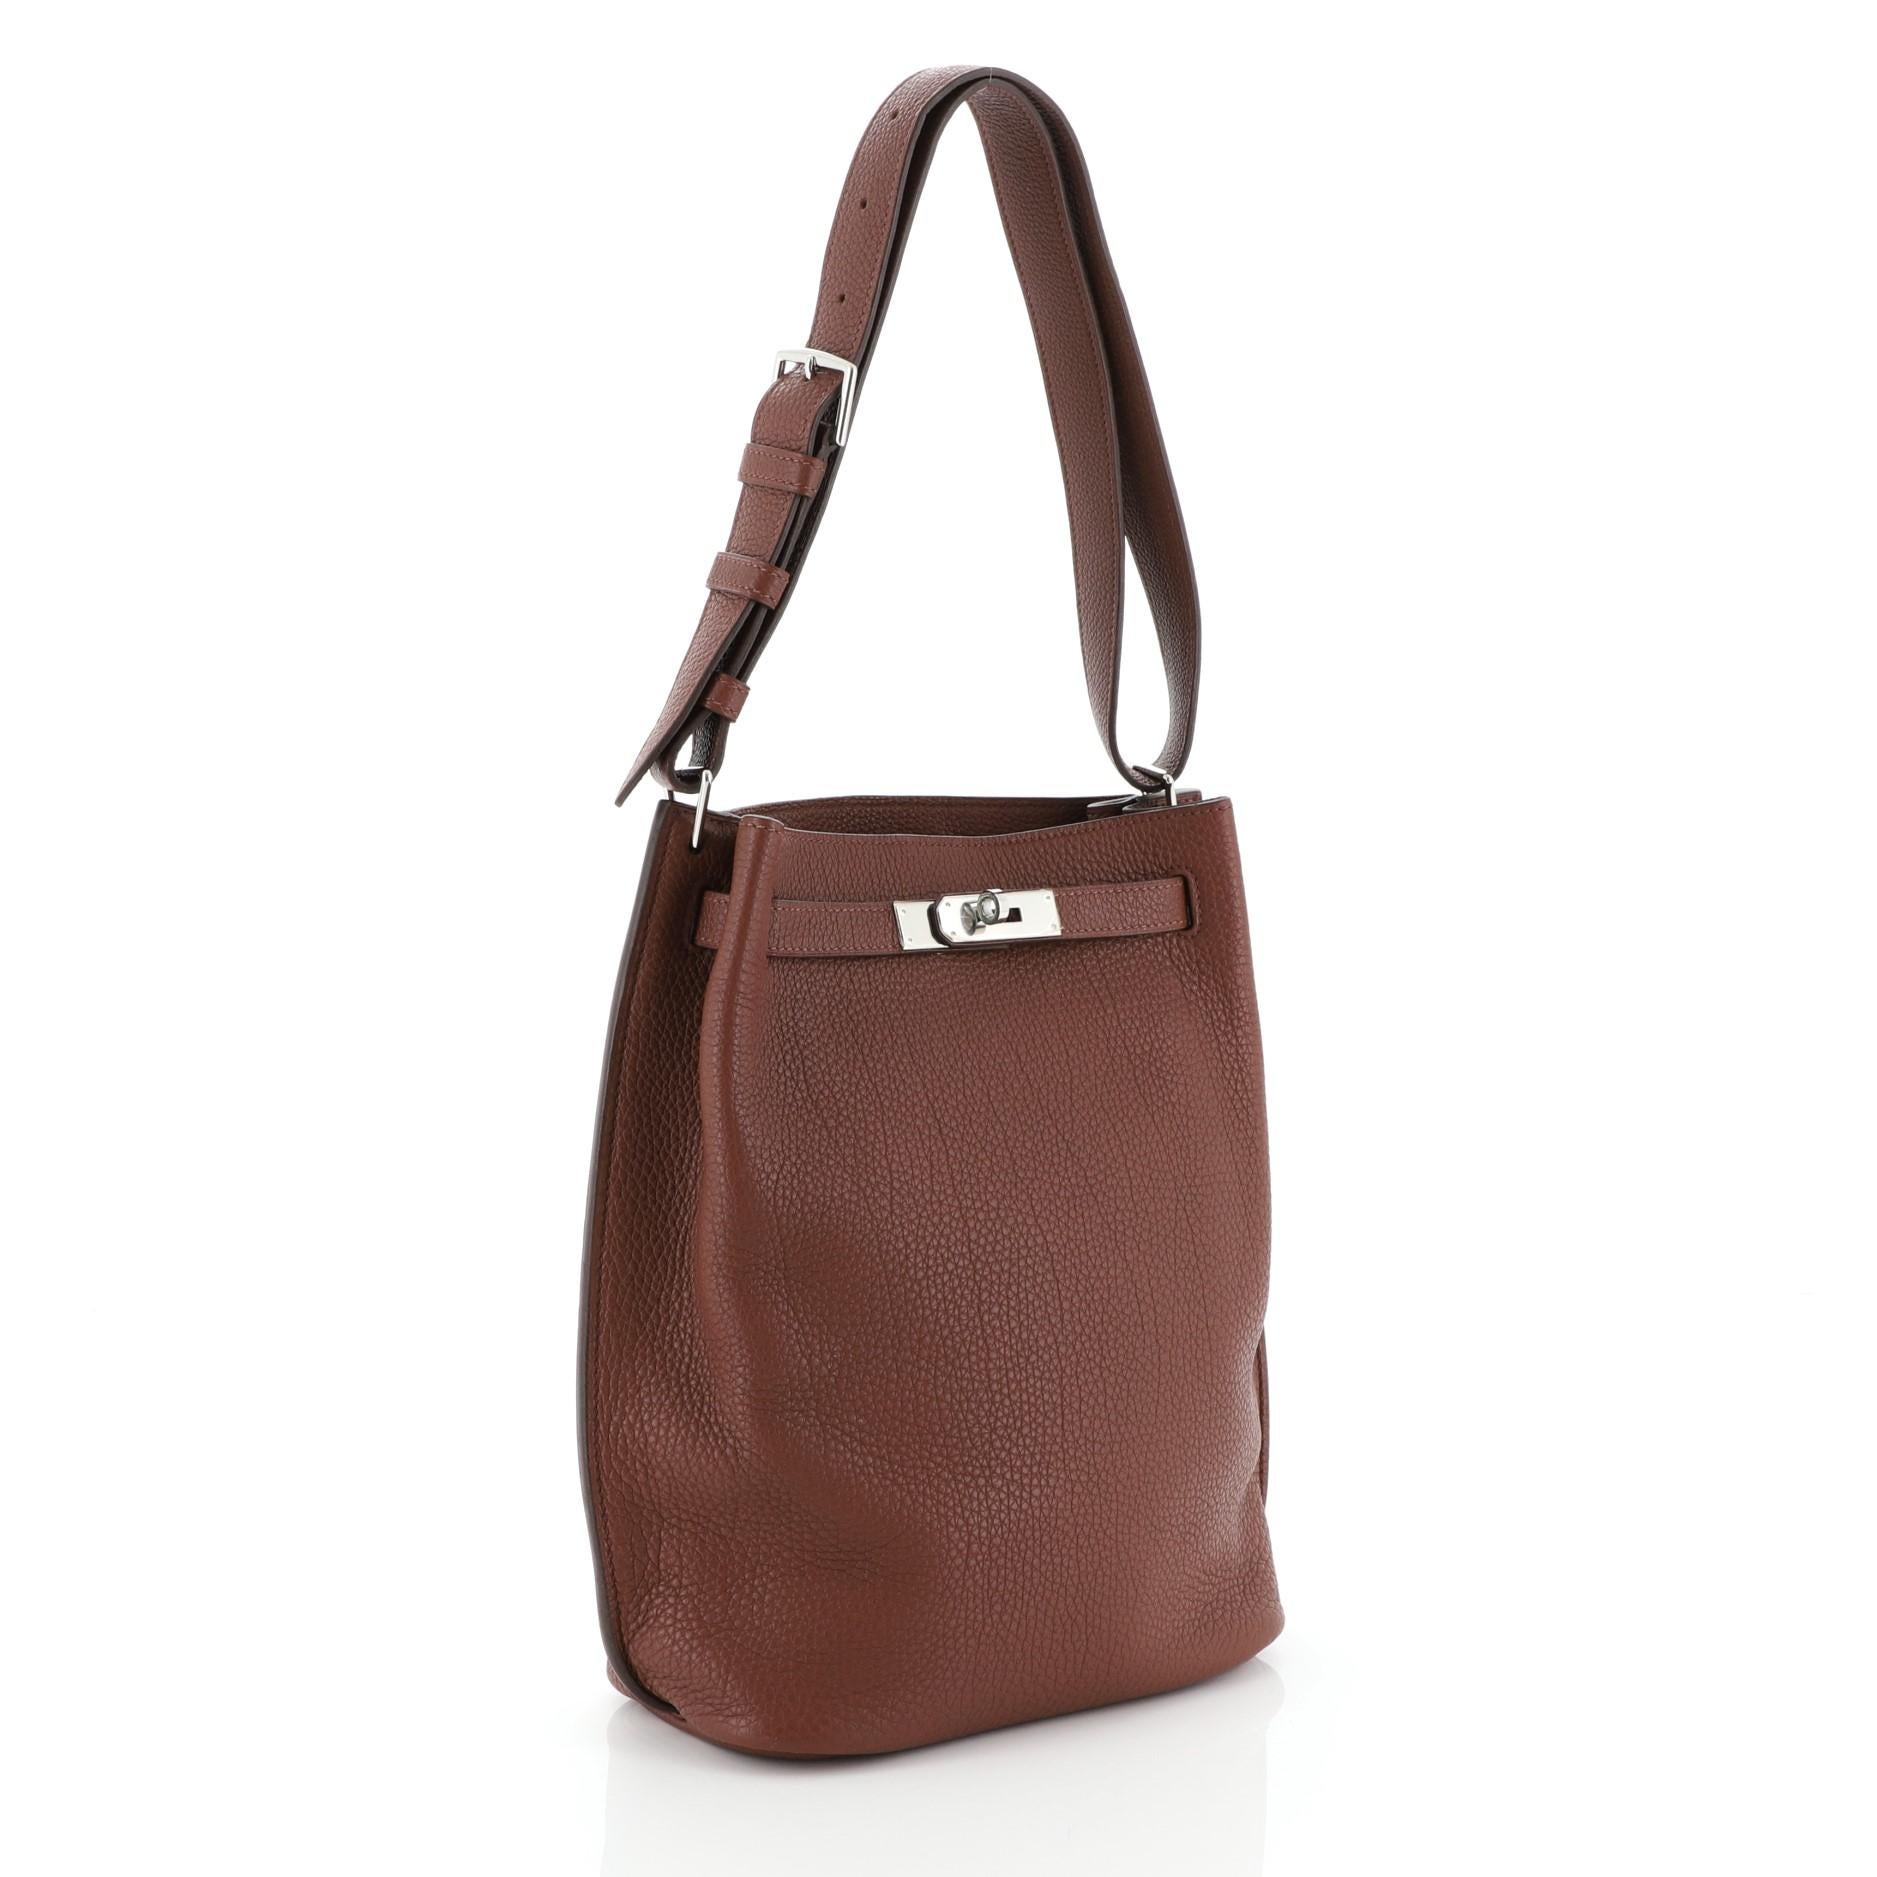 This Hermes So Kelly Handbag Togo 22, crafted from Marron d'Inde brown Togo leather, features an adjustable single looped handle and palladium hardware. Its turn-lock closure opens to a Marron d'Inde brown Chevre leather interior with side zip and